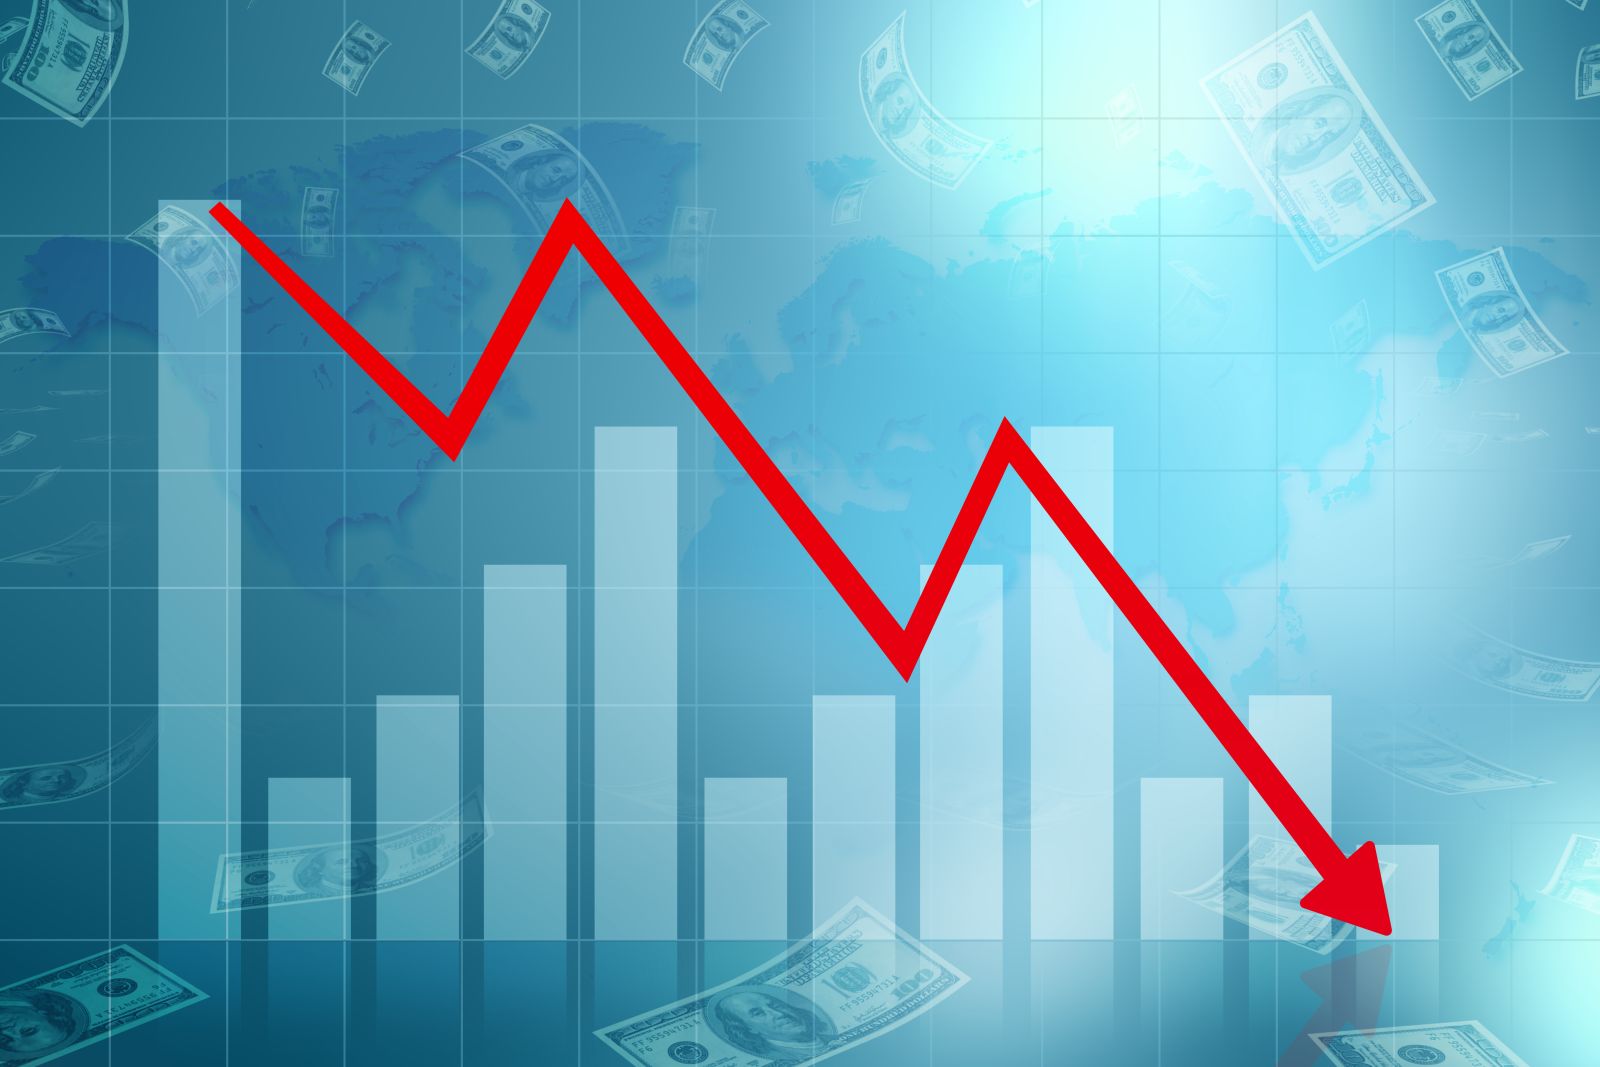 Charts, tickers, traders - Graph down income arrow by The_Creador via Shutterstock